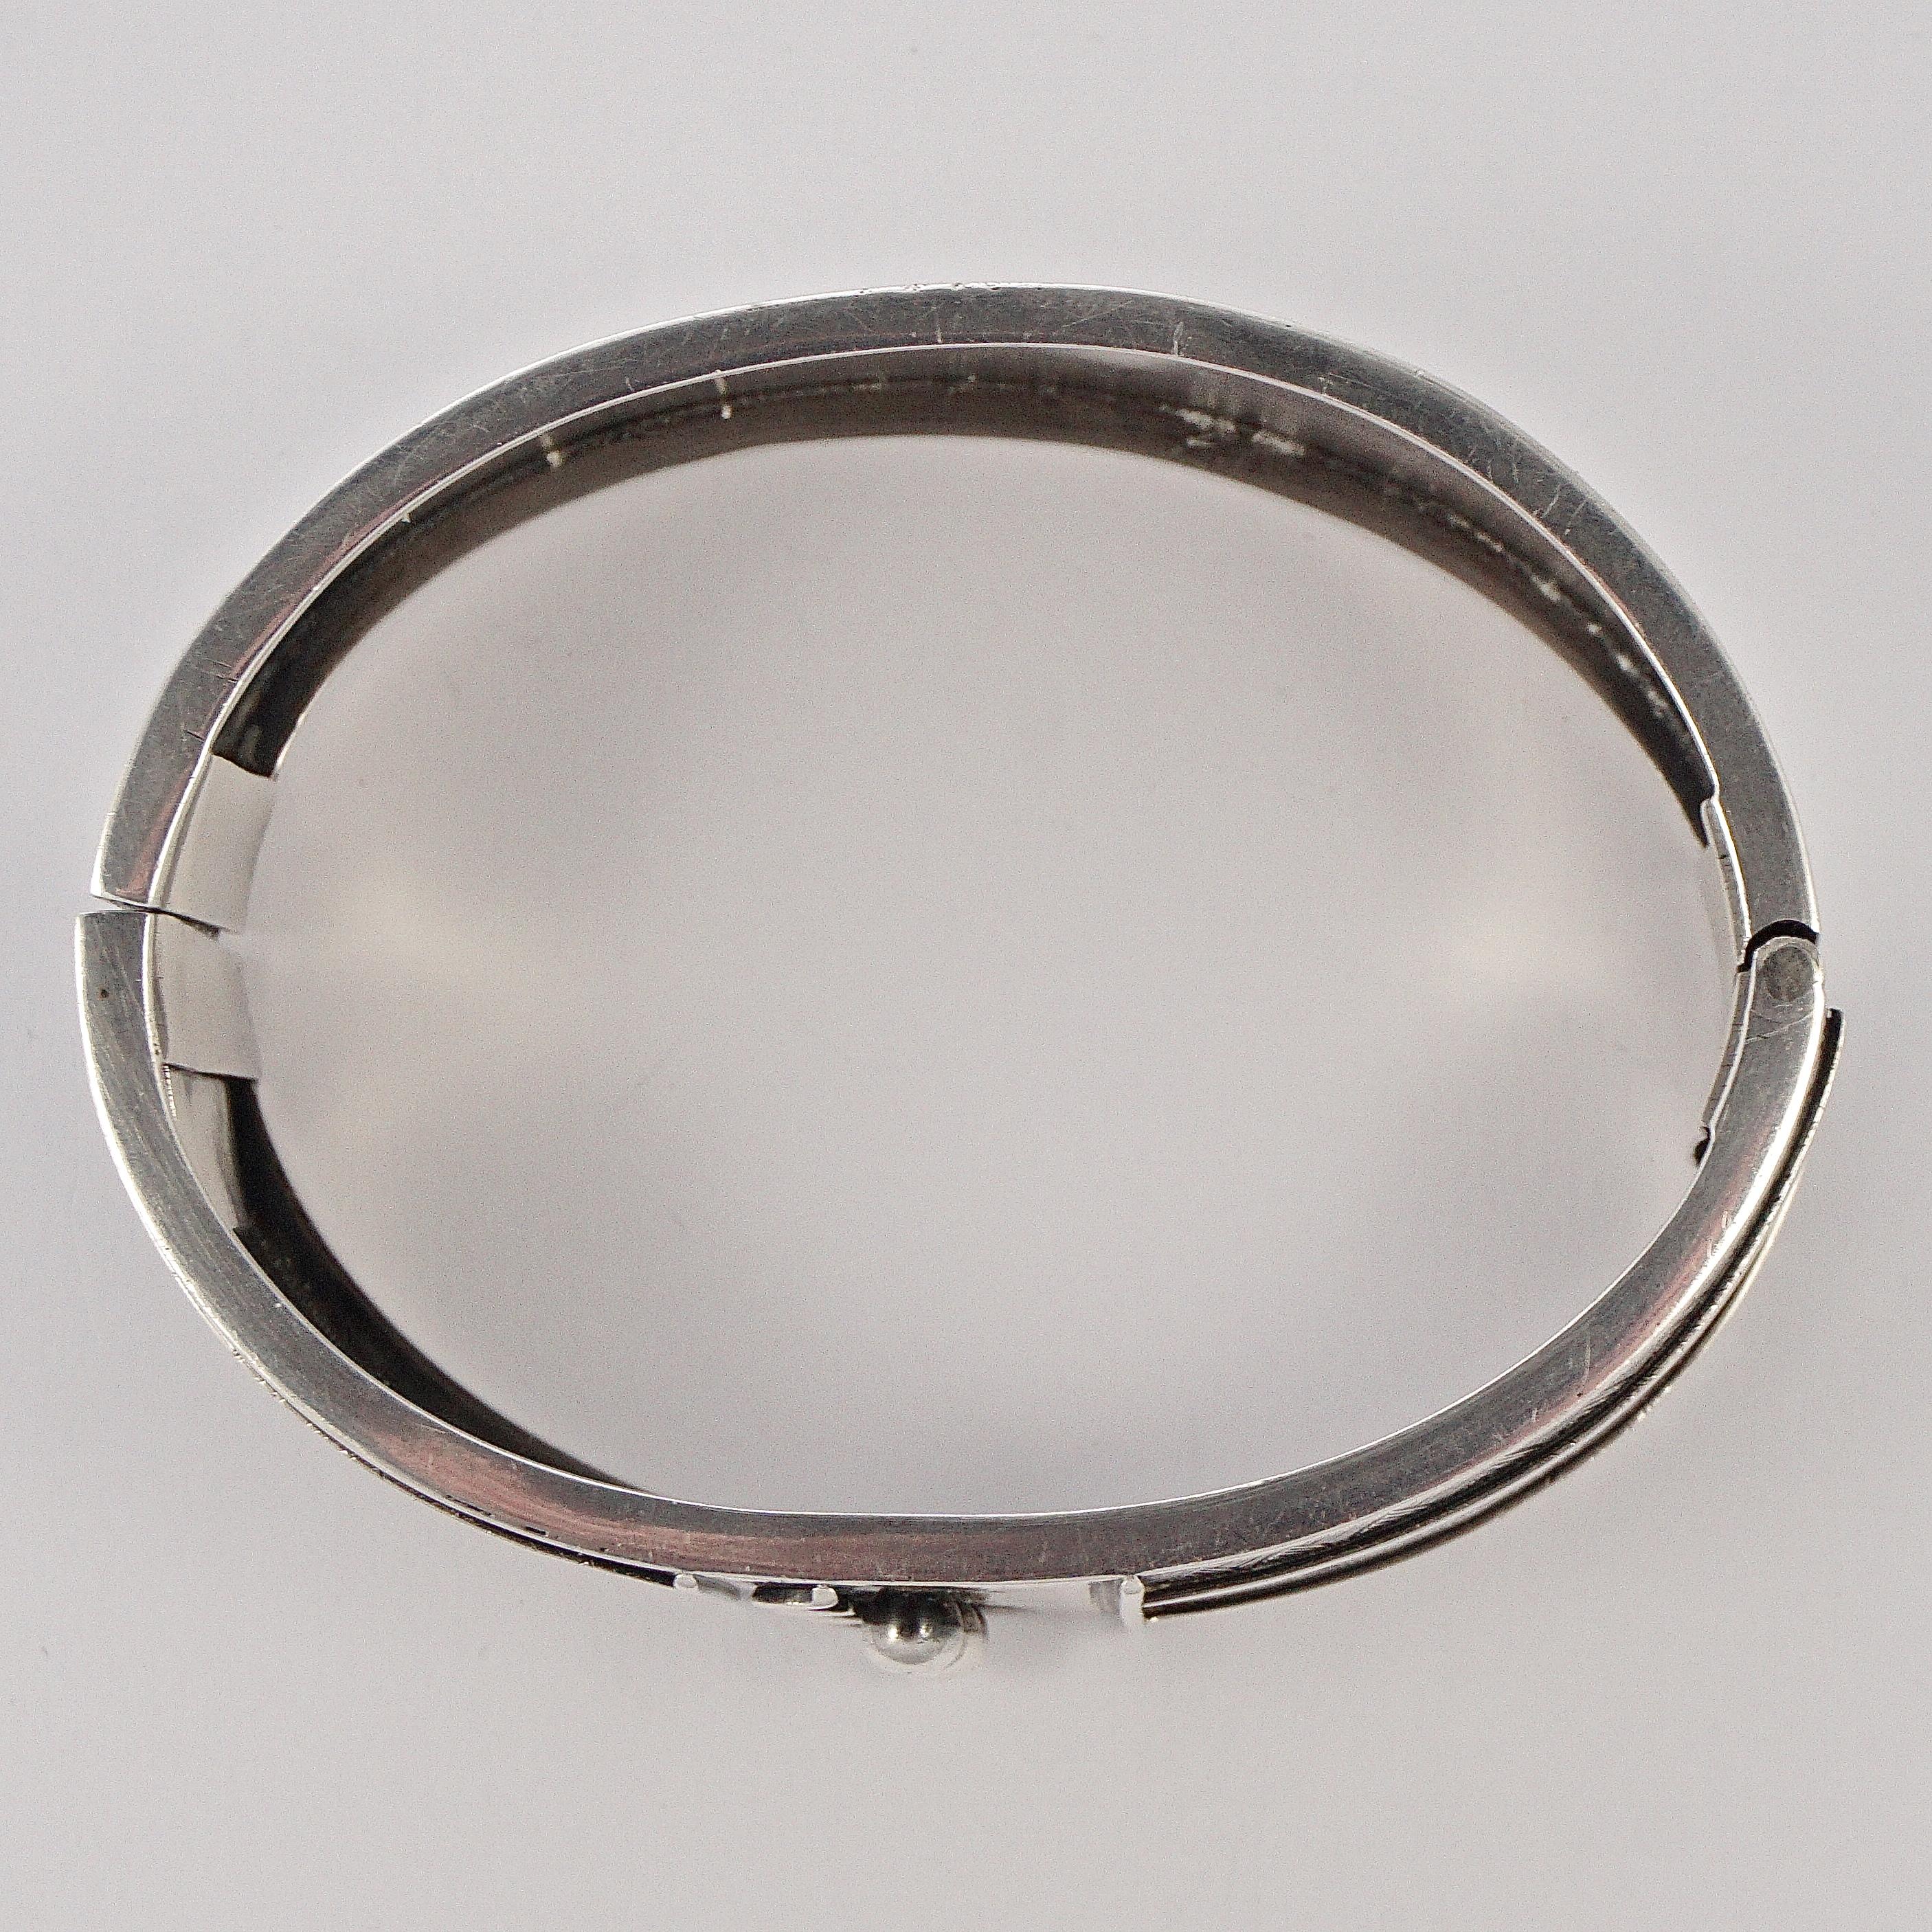 English Victorian Sterling Silver Triple Button Cuff Engraved Bangle Bracelet 5